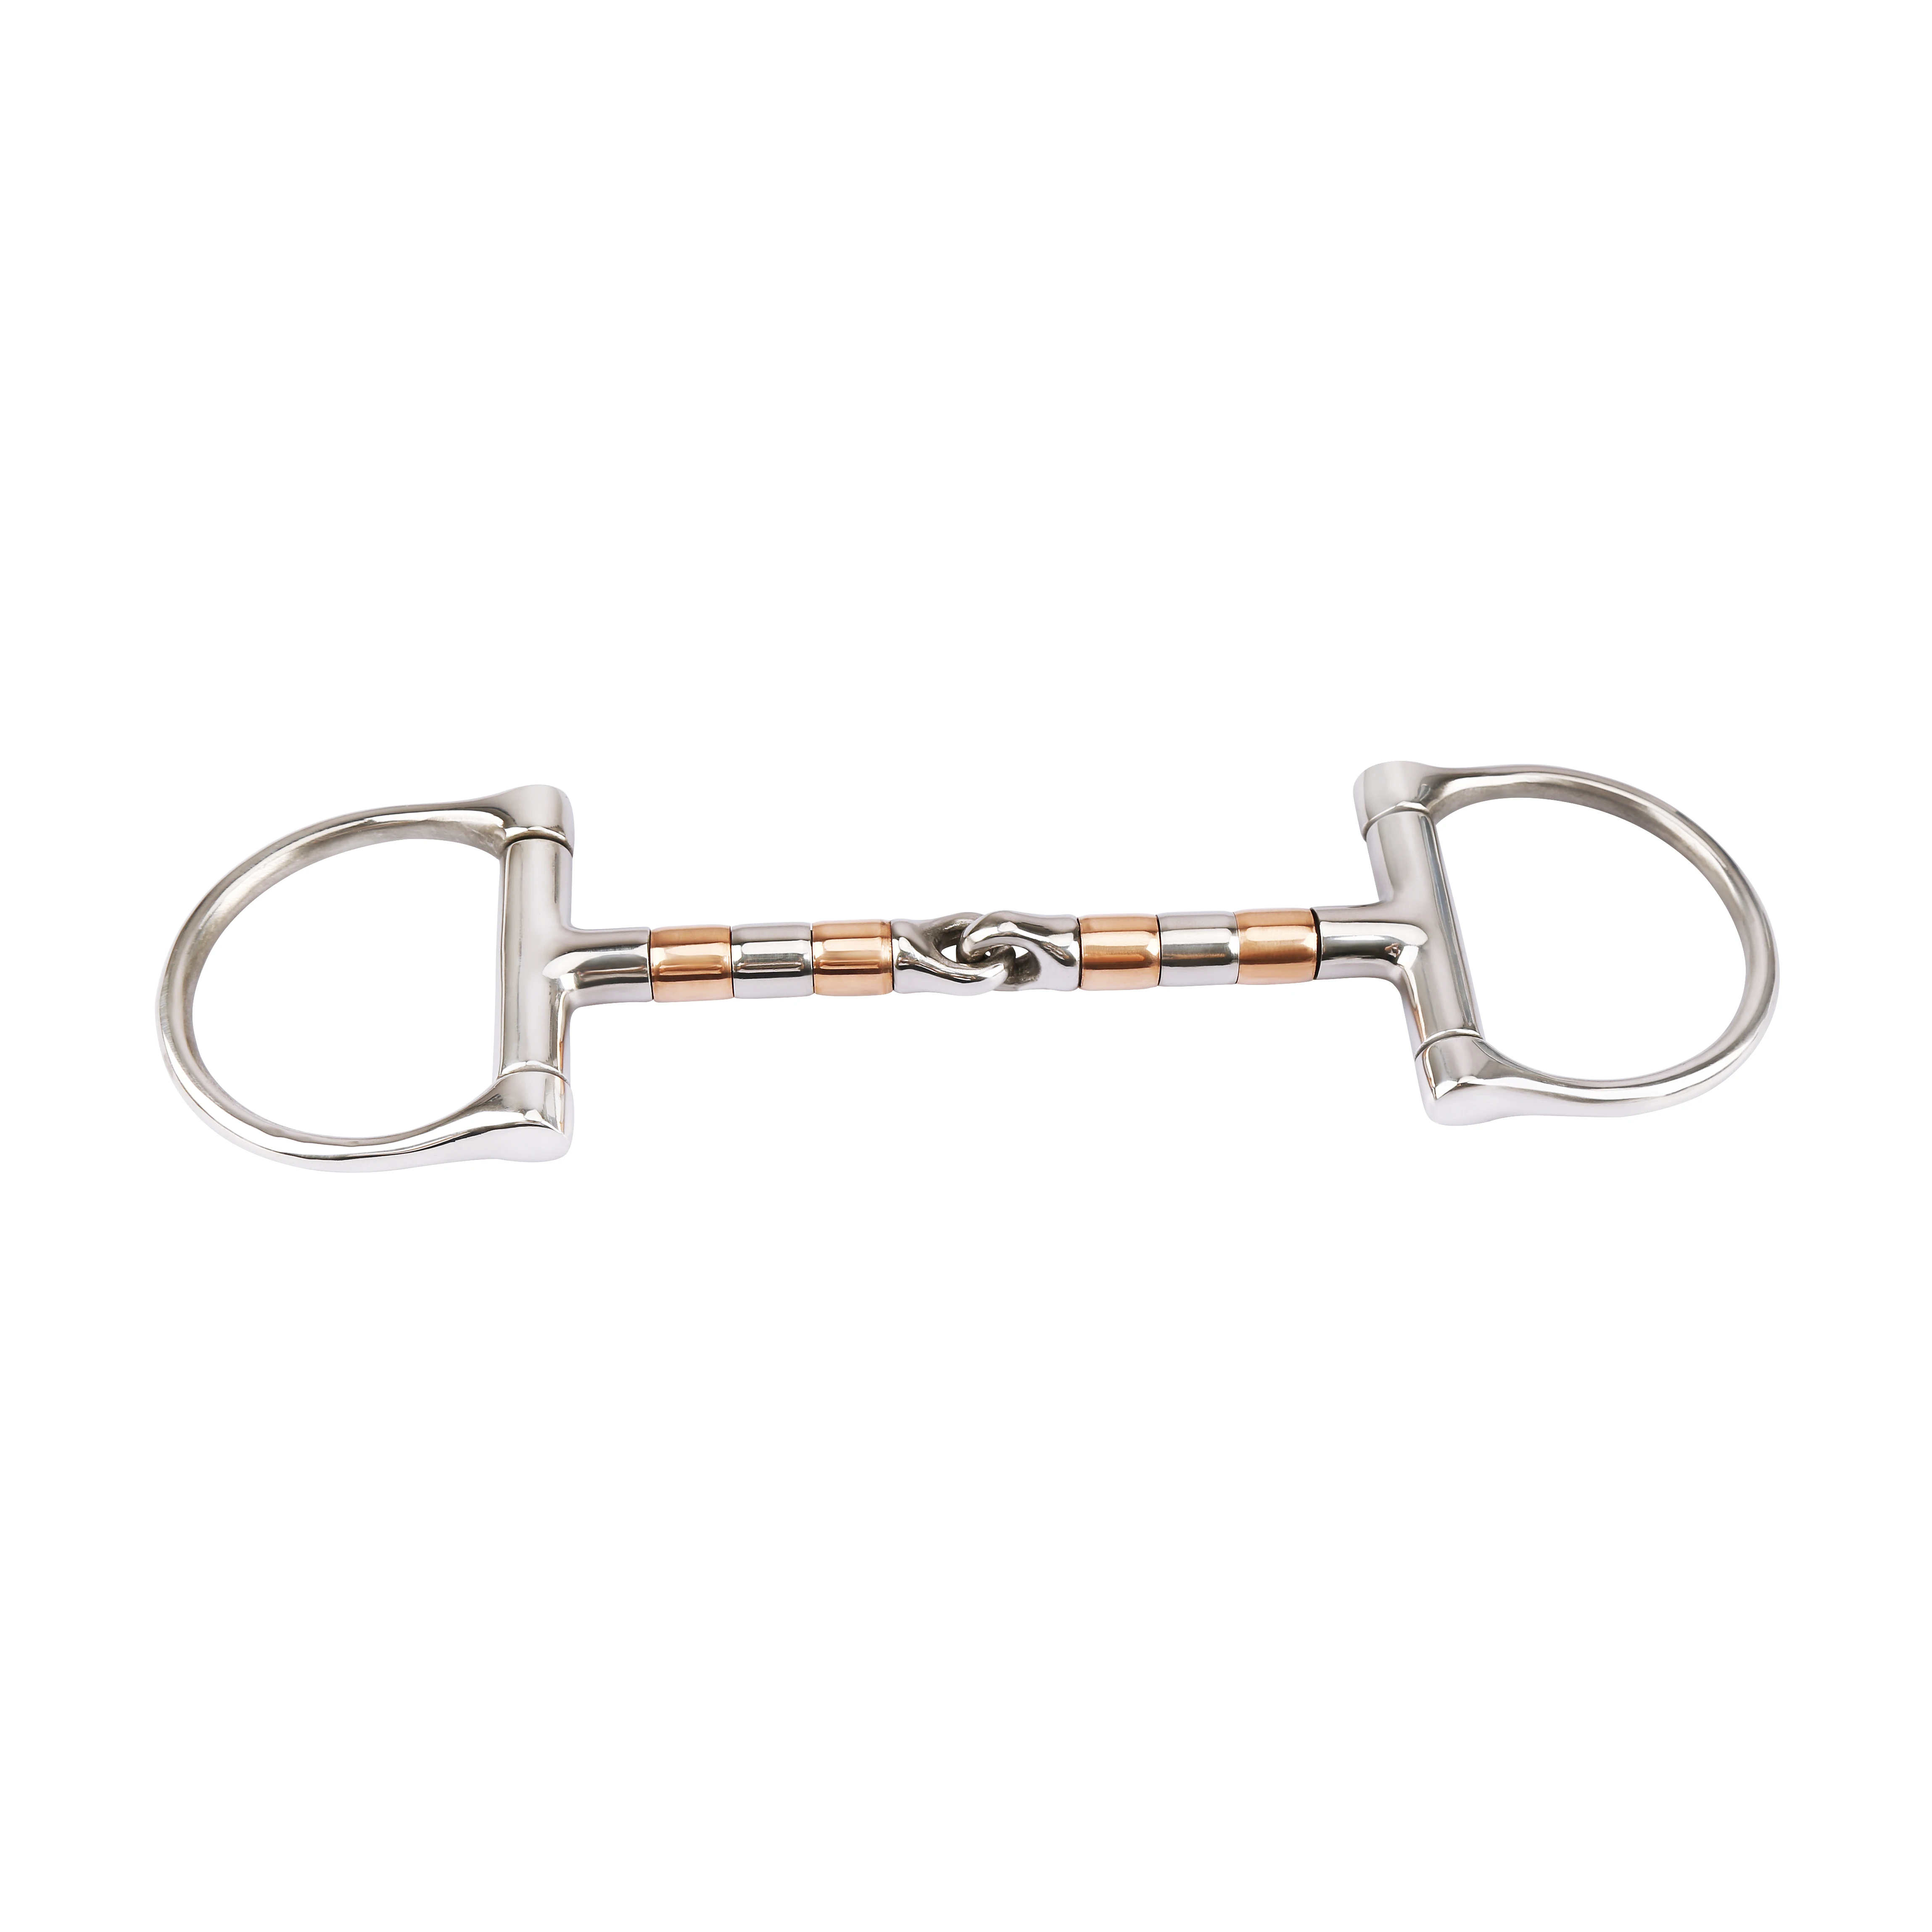 Horse Roller Mouth Dee Biy Stainless Gab bit 135mm length Equestrian Horse Mouth Bit